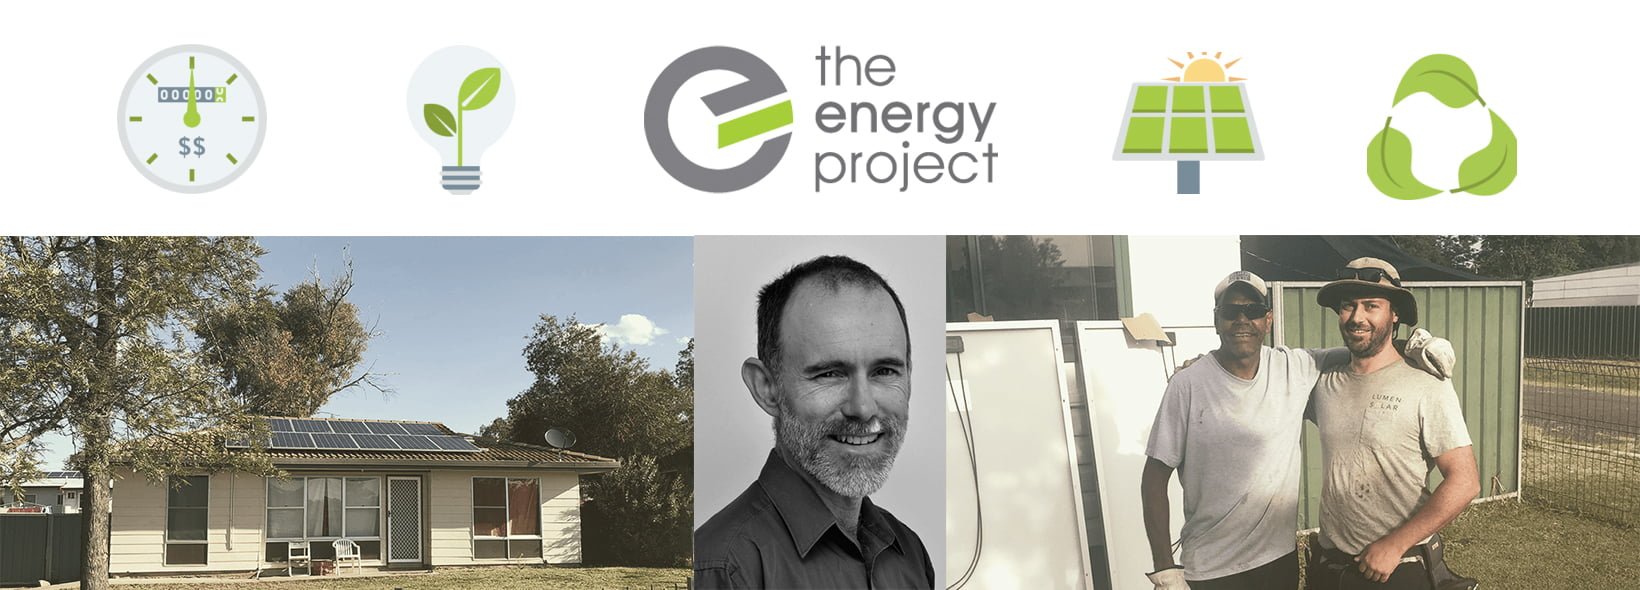 The Energy Project – practical solutions to energy problems